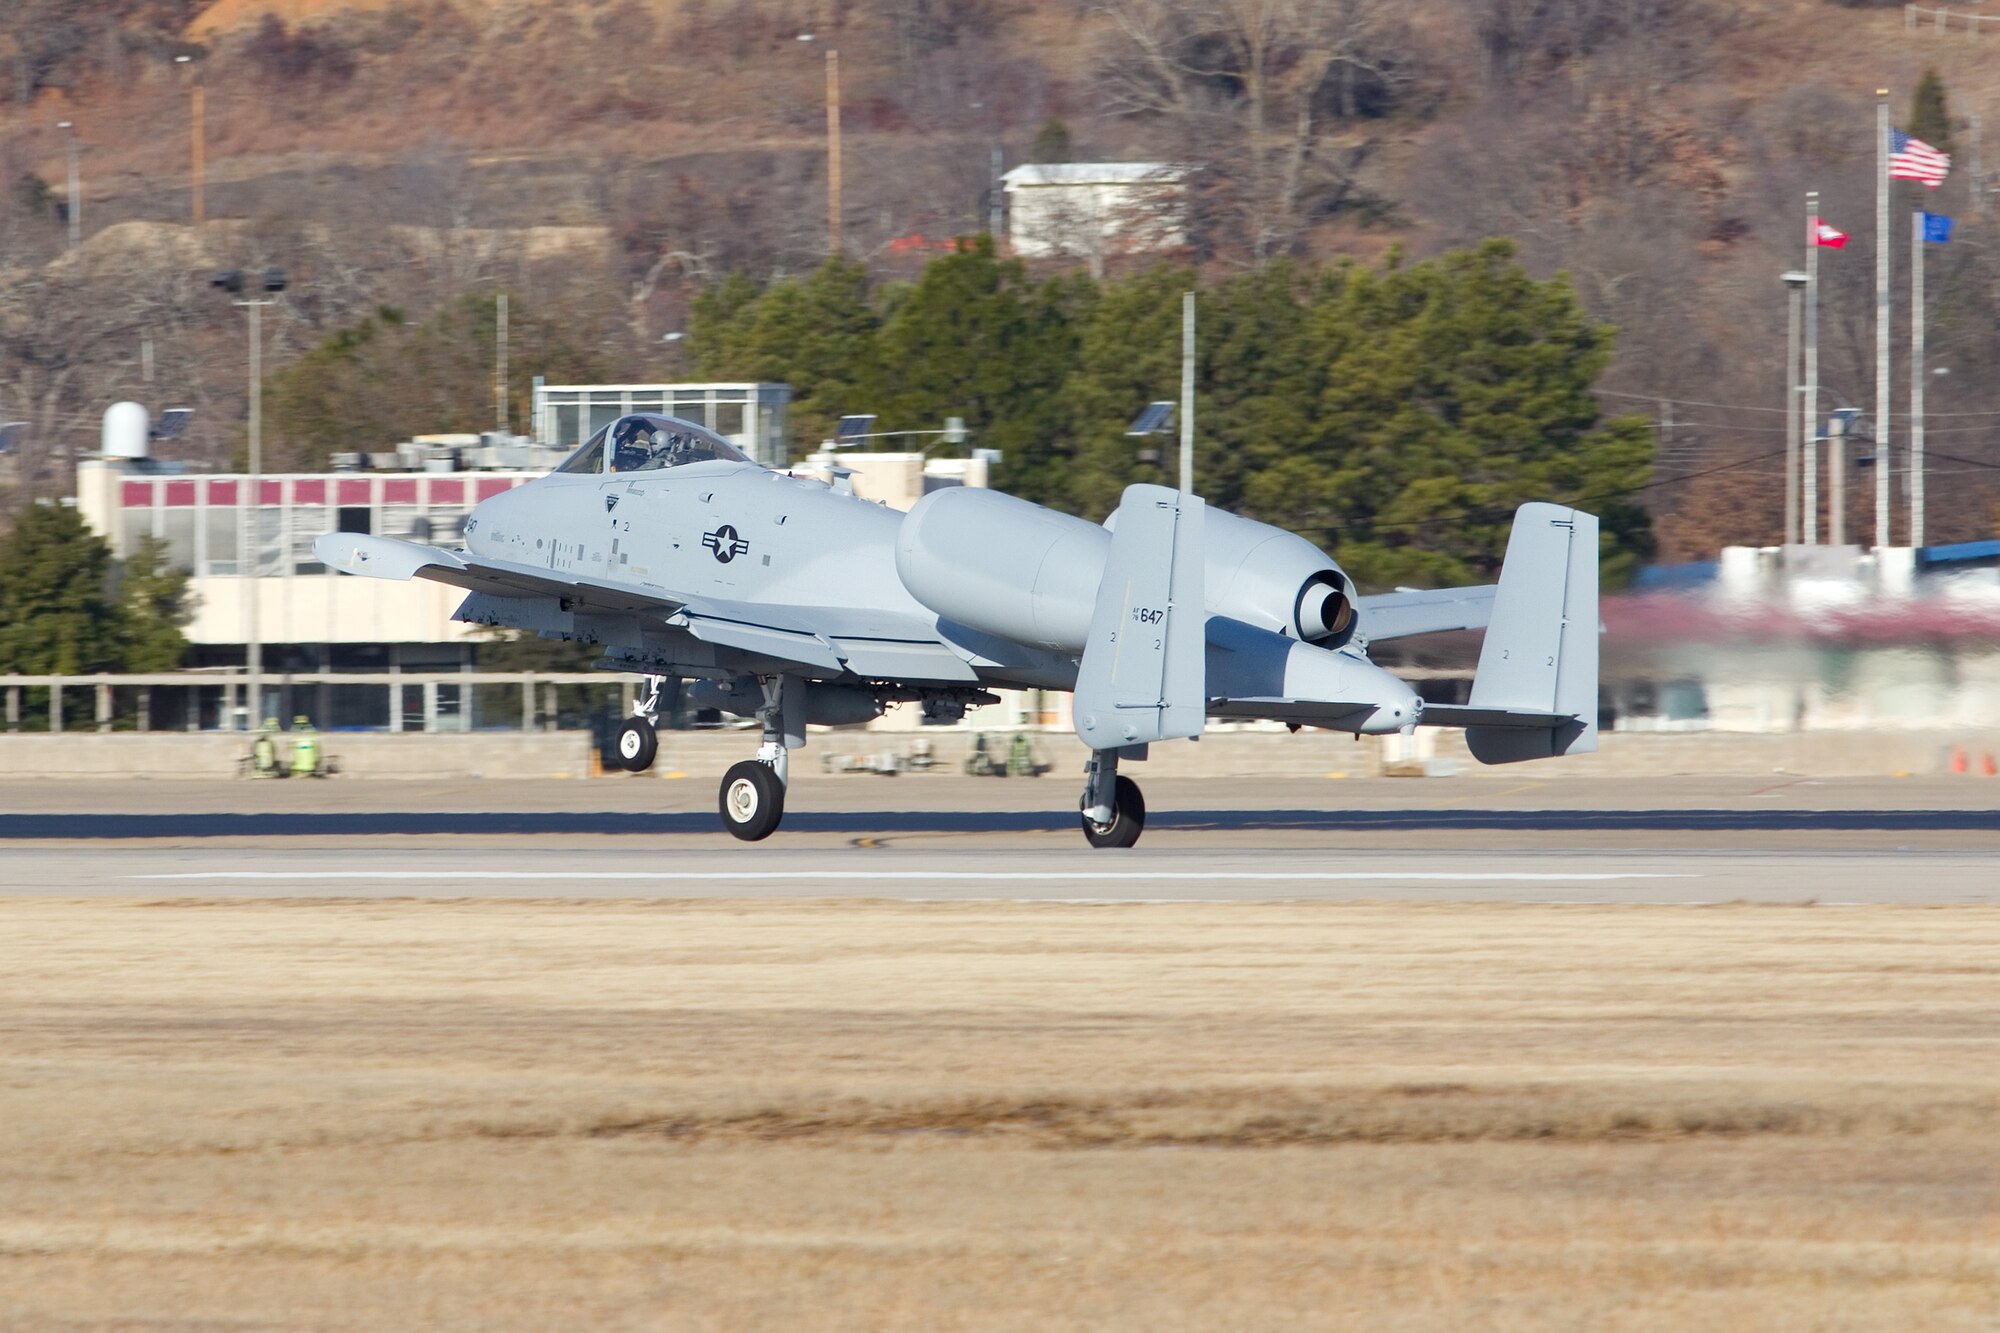 An A-10C Thunderbolt II "Warthog" (Tail No. 0647) takes off from the 188th Fighter Wing for Moody Air Force Base, Ga., Jan. 15, 2014. Tail Nos. 0129 and 0647 were transferred from the 188th’s Ebbing Air National Guard Base, Fort Smith, Ark., as part of the wing’s on-going conversion from a fighter mission to remotely piloted aircraft and Intelligence mission, which will include a space-focused targeting squadron. The 188th now has nine remaining A-10s left on station. The A-10s will join Moody AFB’s 75th Fighter Squadron. (Courtesy photo by Nick Thomas)